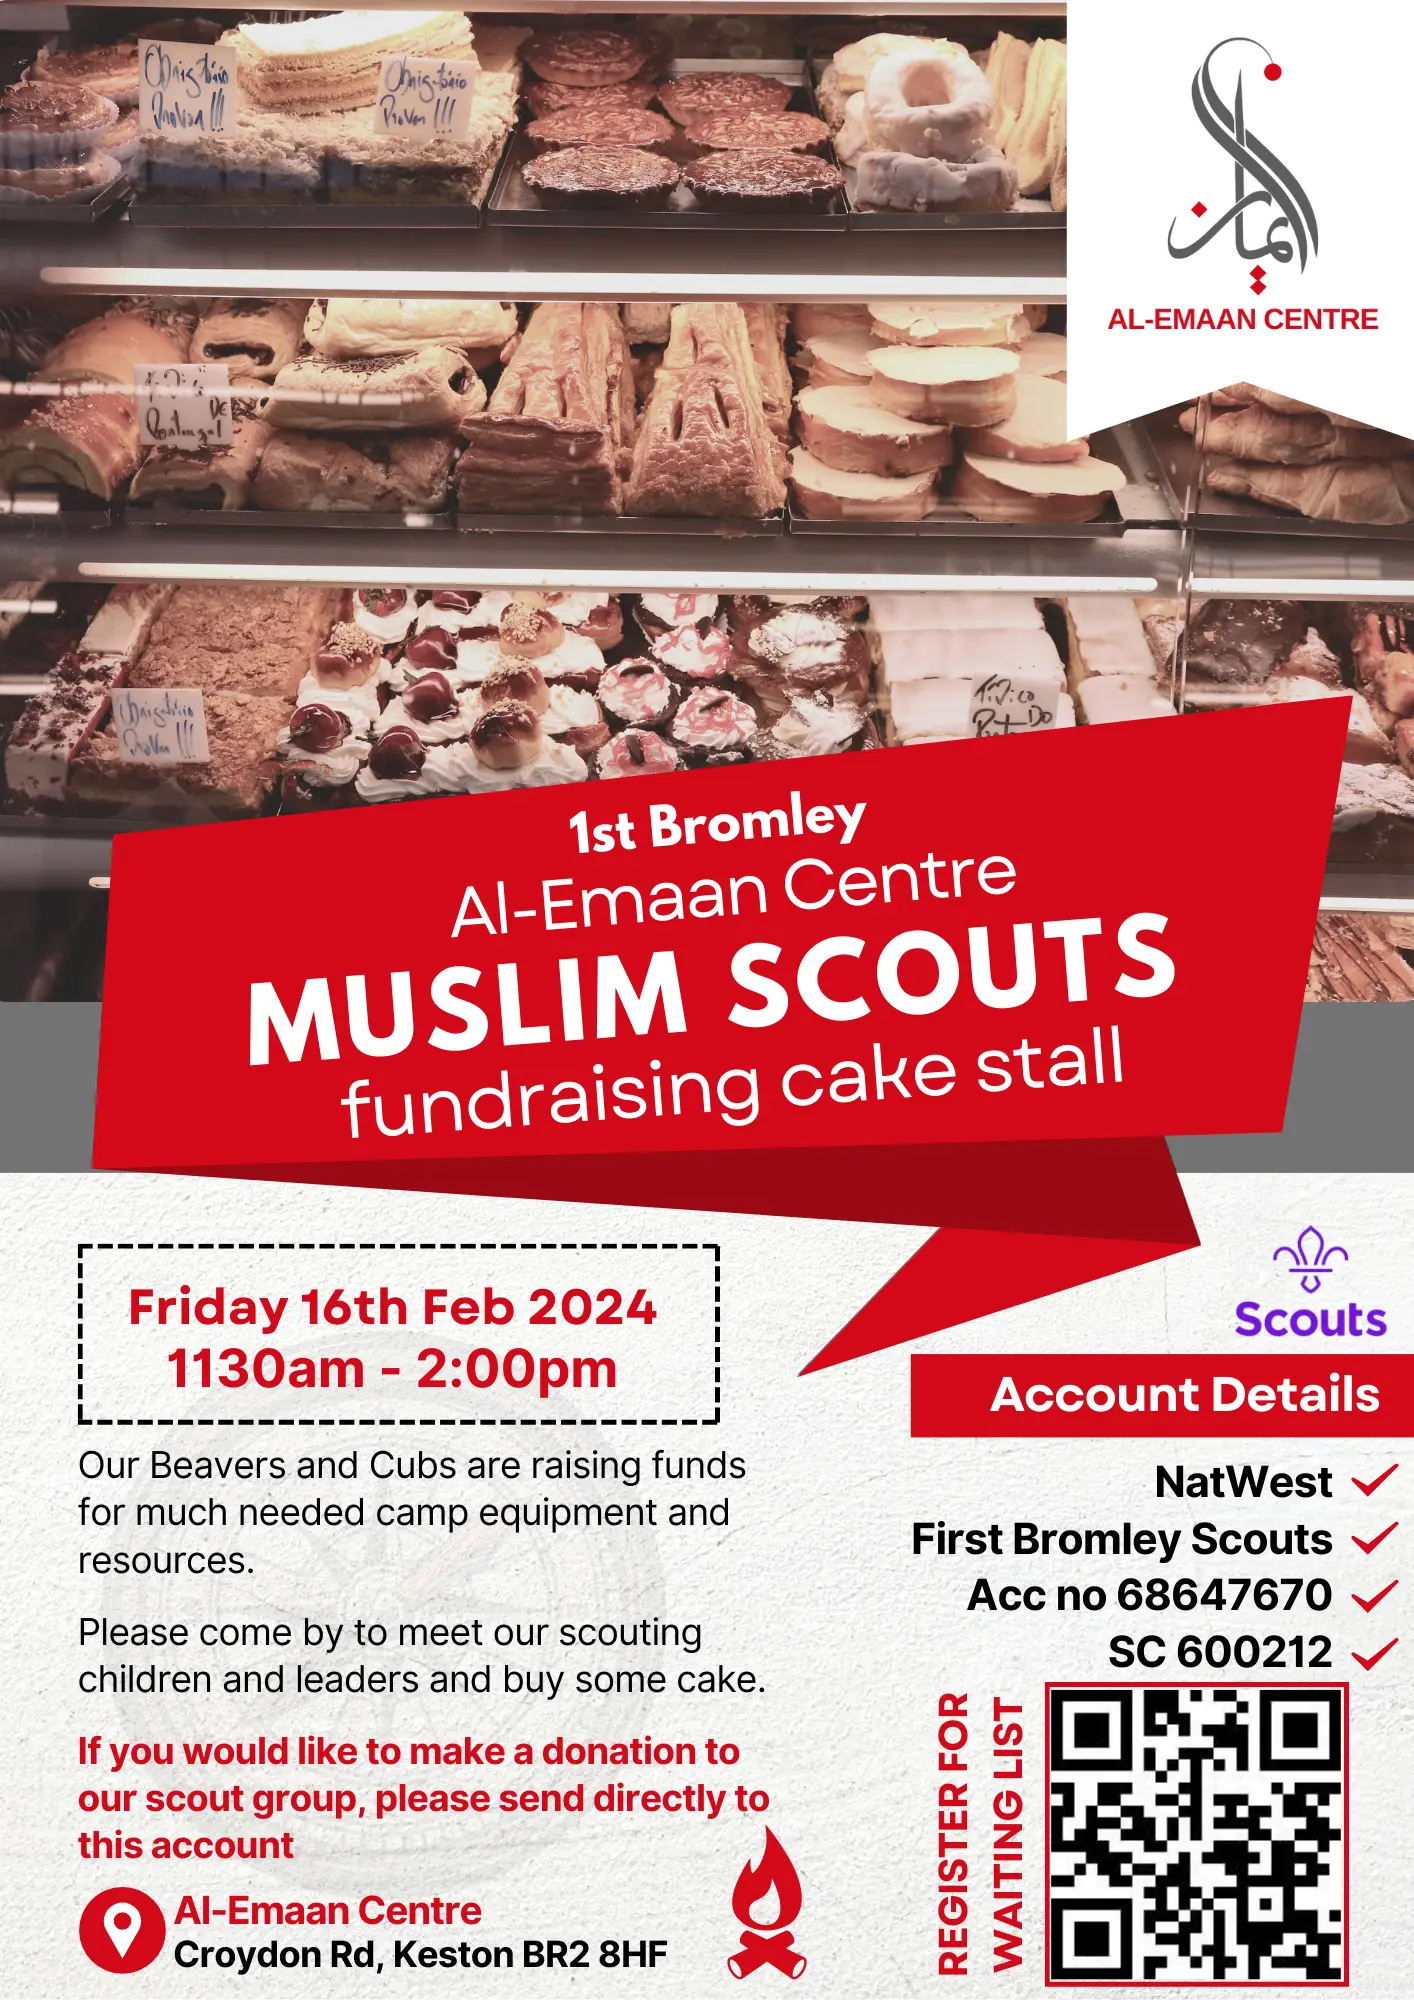 1st Bromley Al-Emaan Centre Muslim Scouts fundraising cake stall